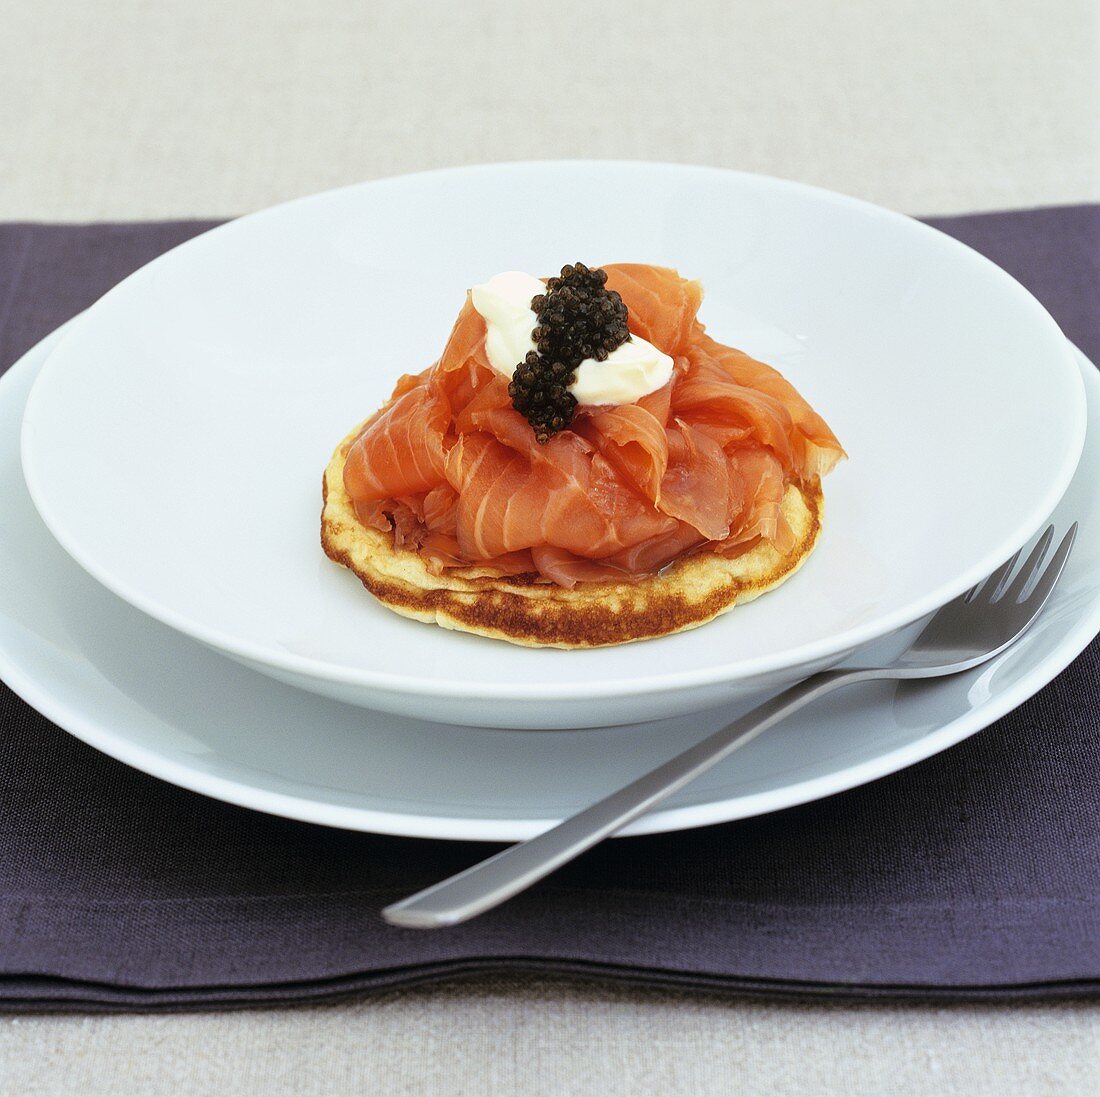 Smoked salmon with sour cream and caviar on blini